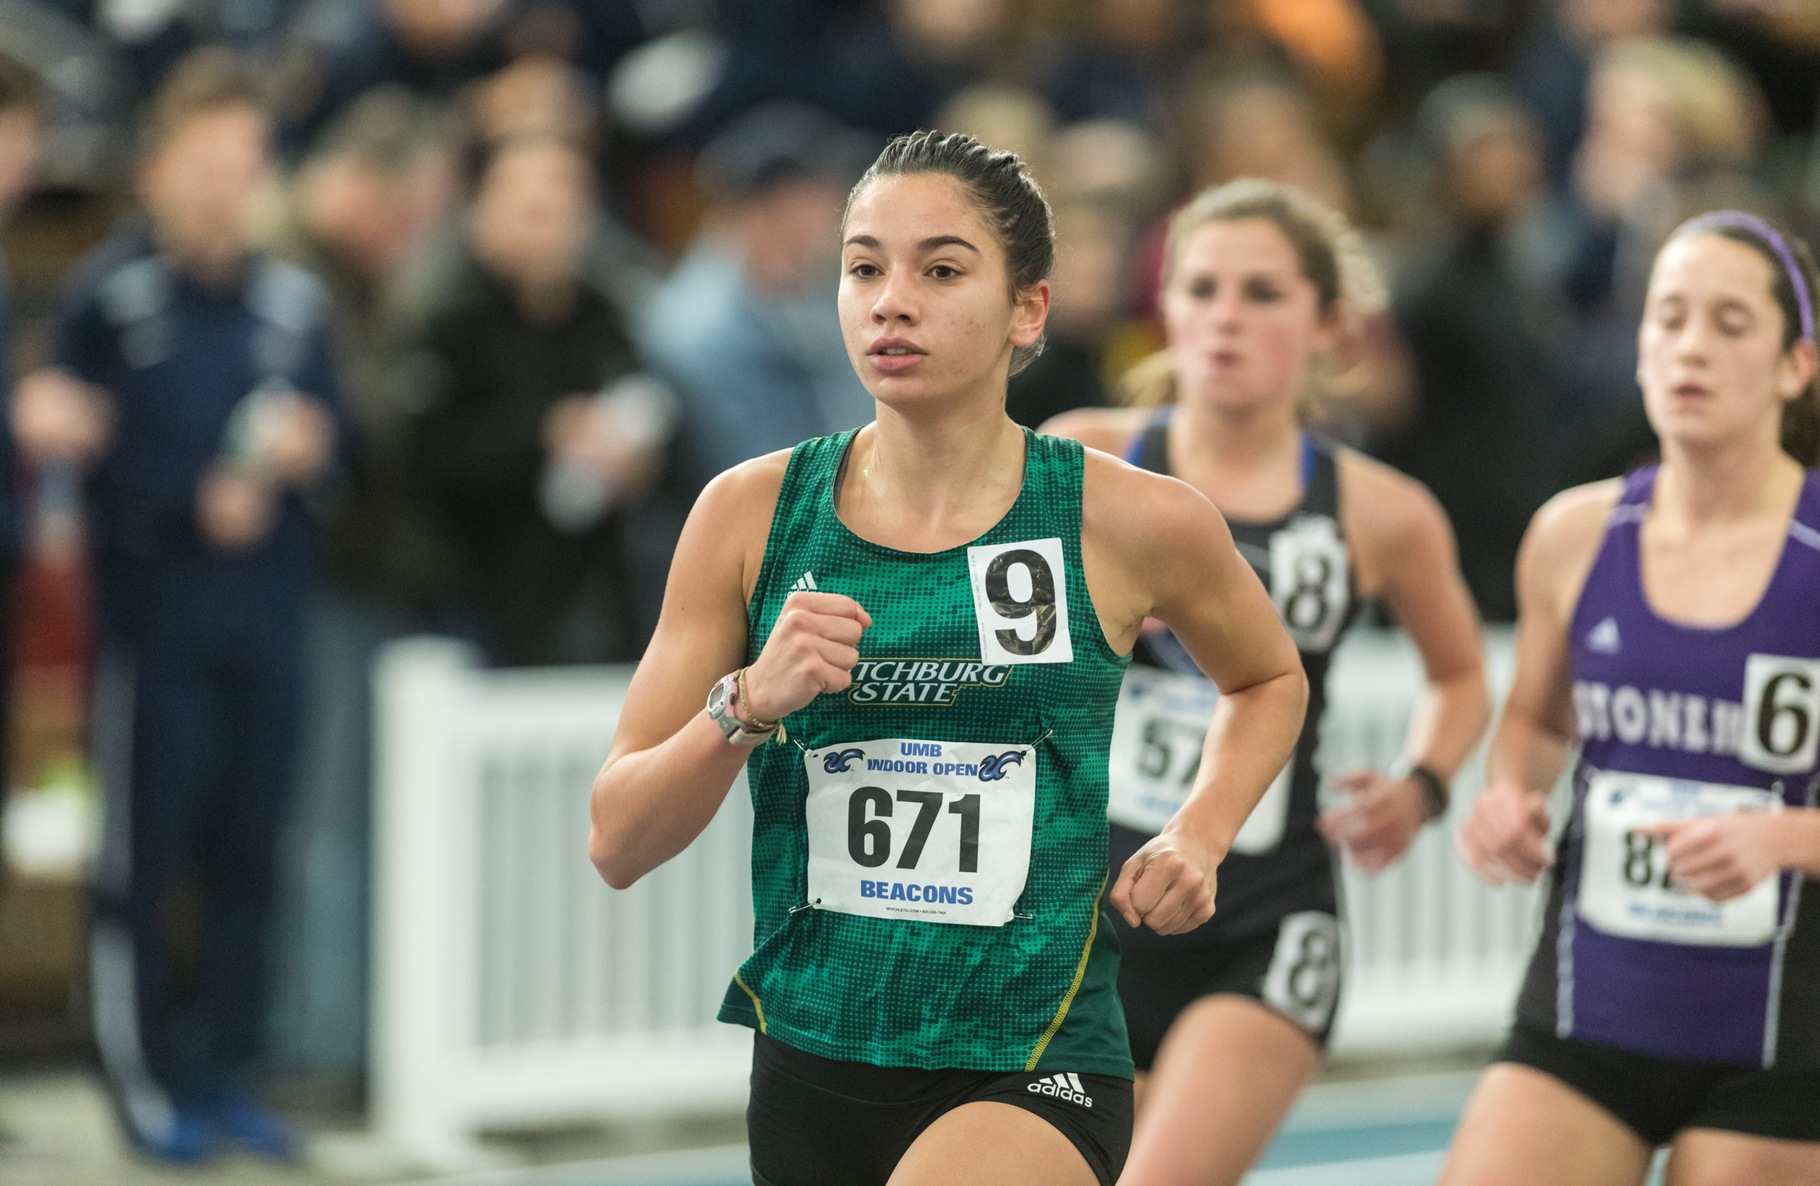 Fitchburg State Places Fourth At MASCAC Championships